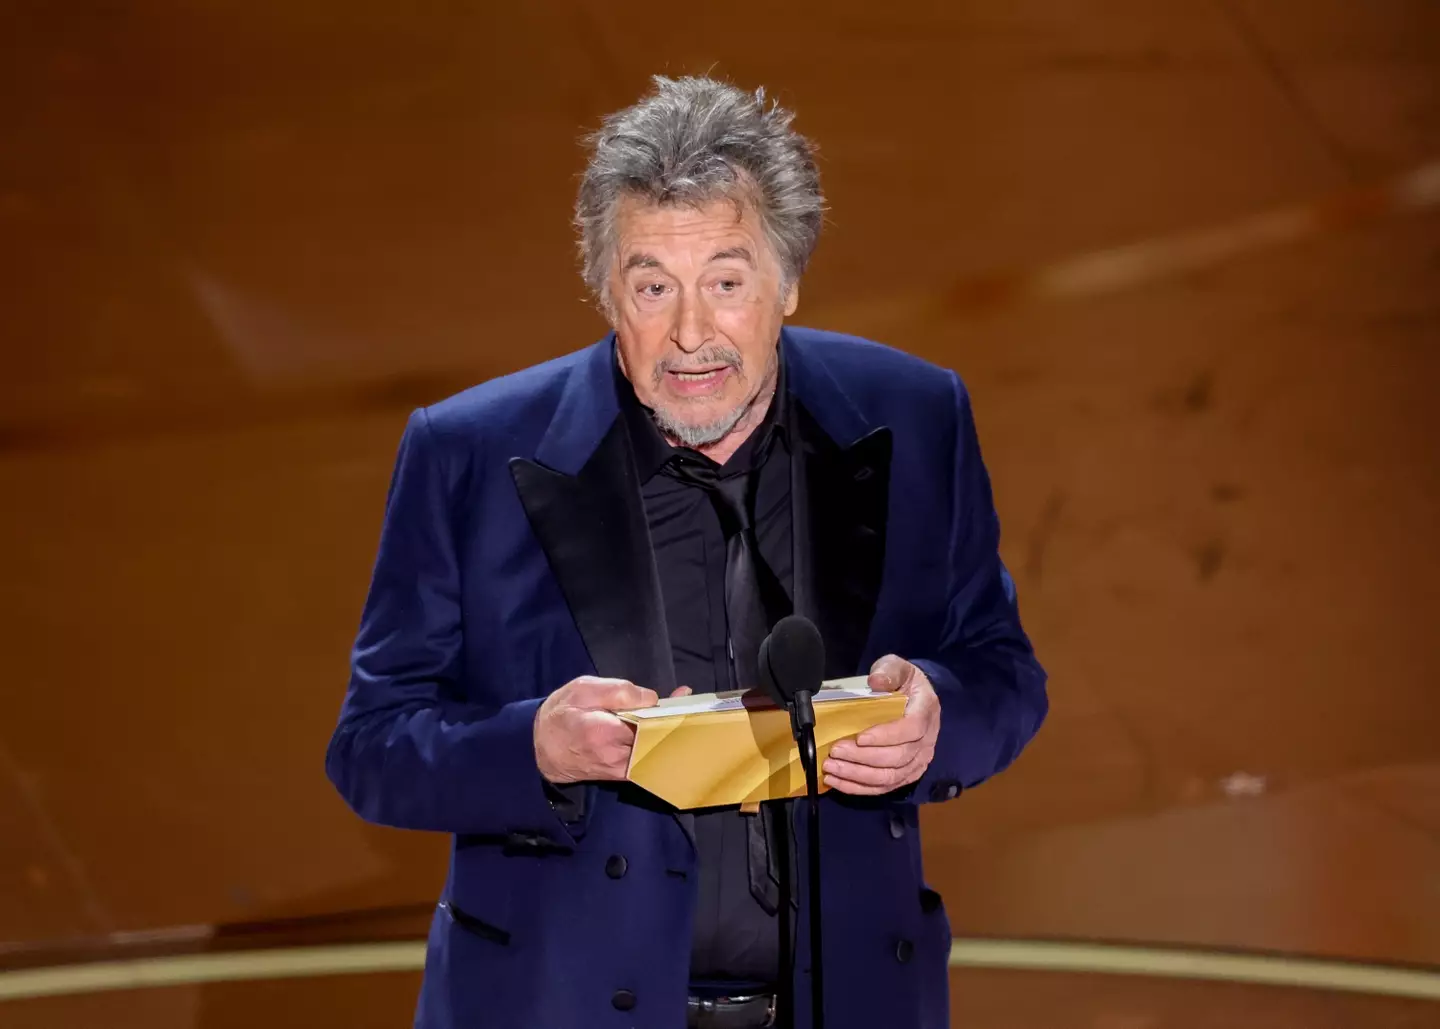 Al Pacino announced Oppenheimer as the winner of Best Picture.